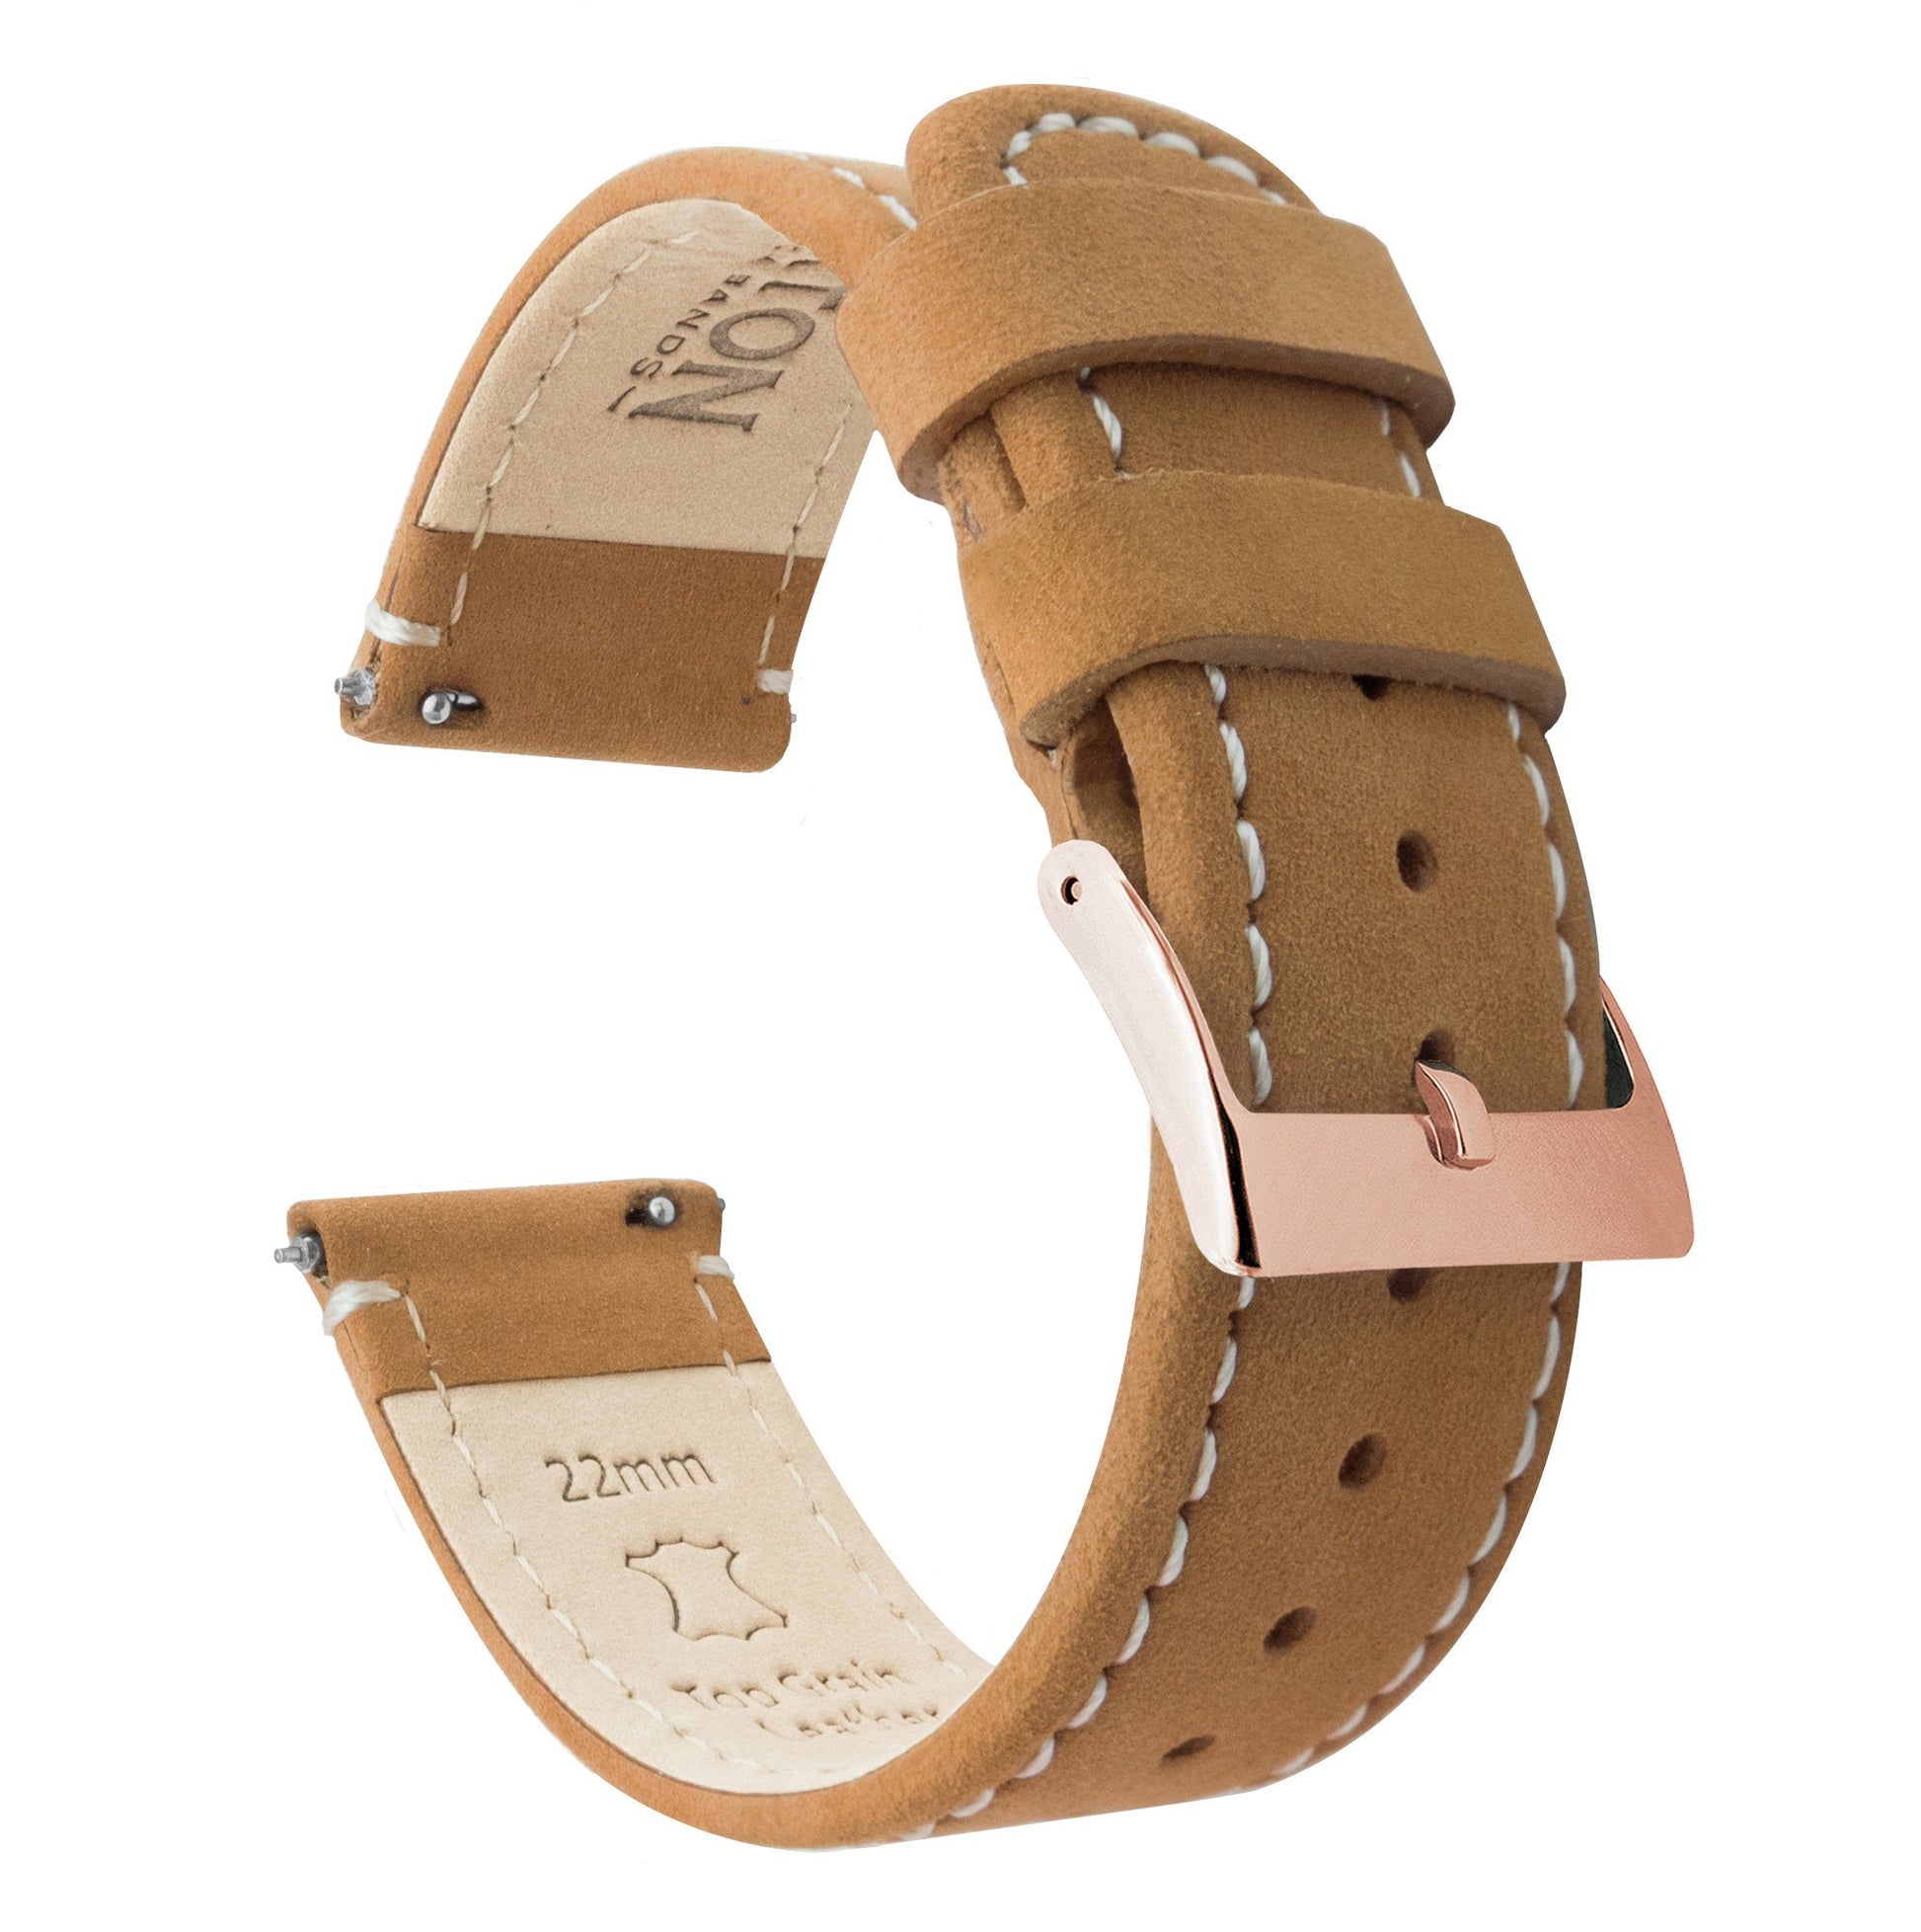 Fossil Gen 5 | Gingerbread Brown Leather & Linen White Stitching - Barton Watch Bands